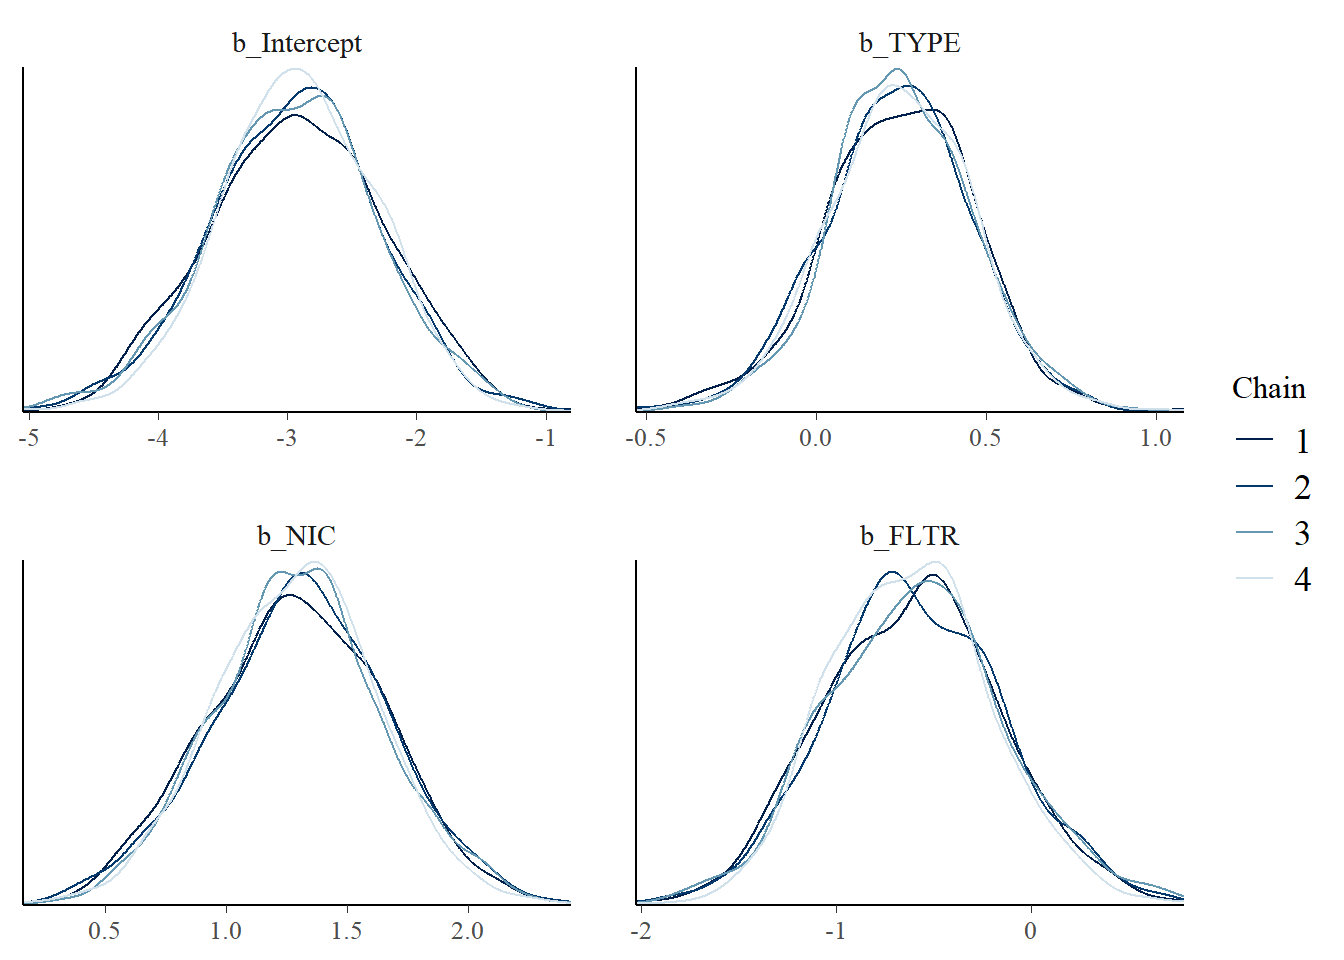 Posterior density plot by chain